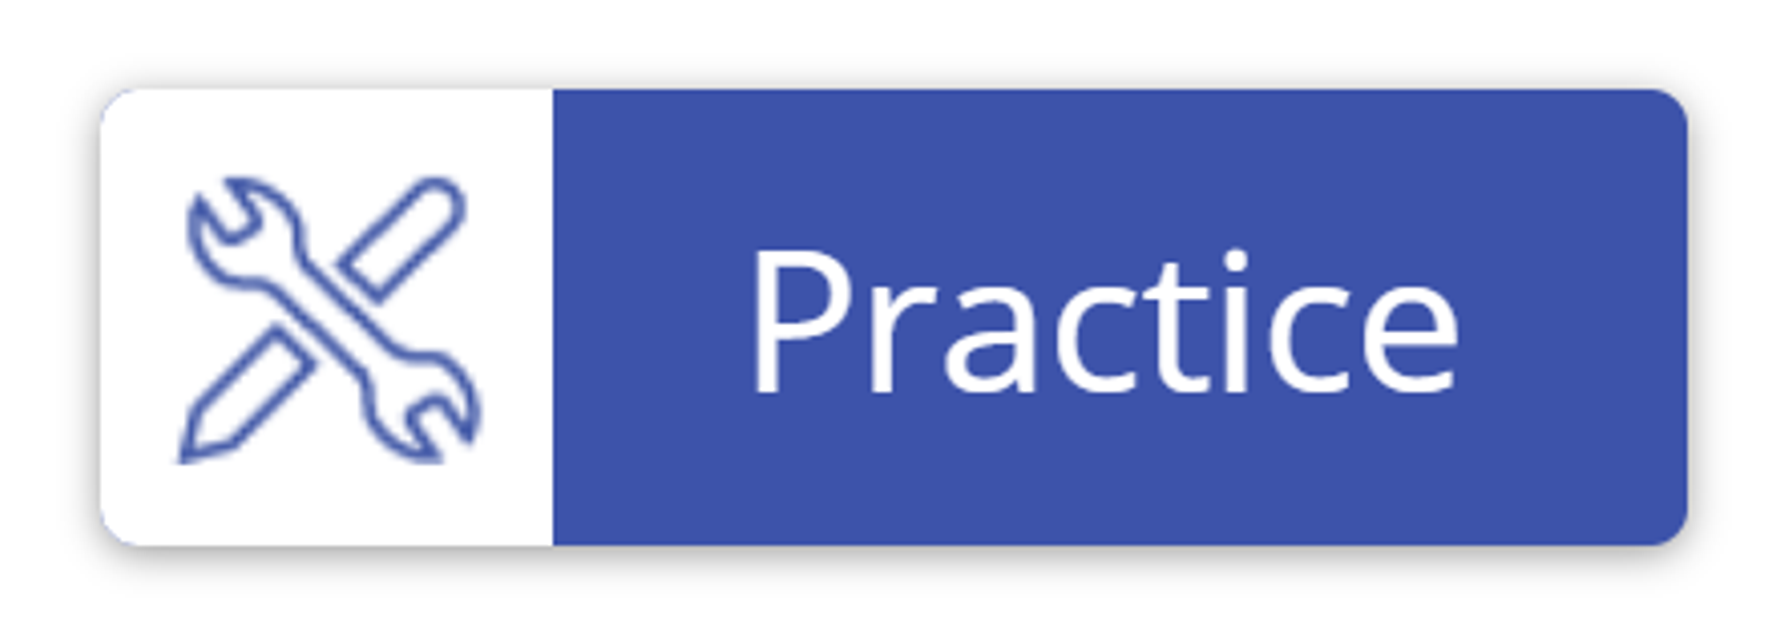 practice-button.png